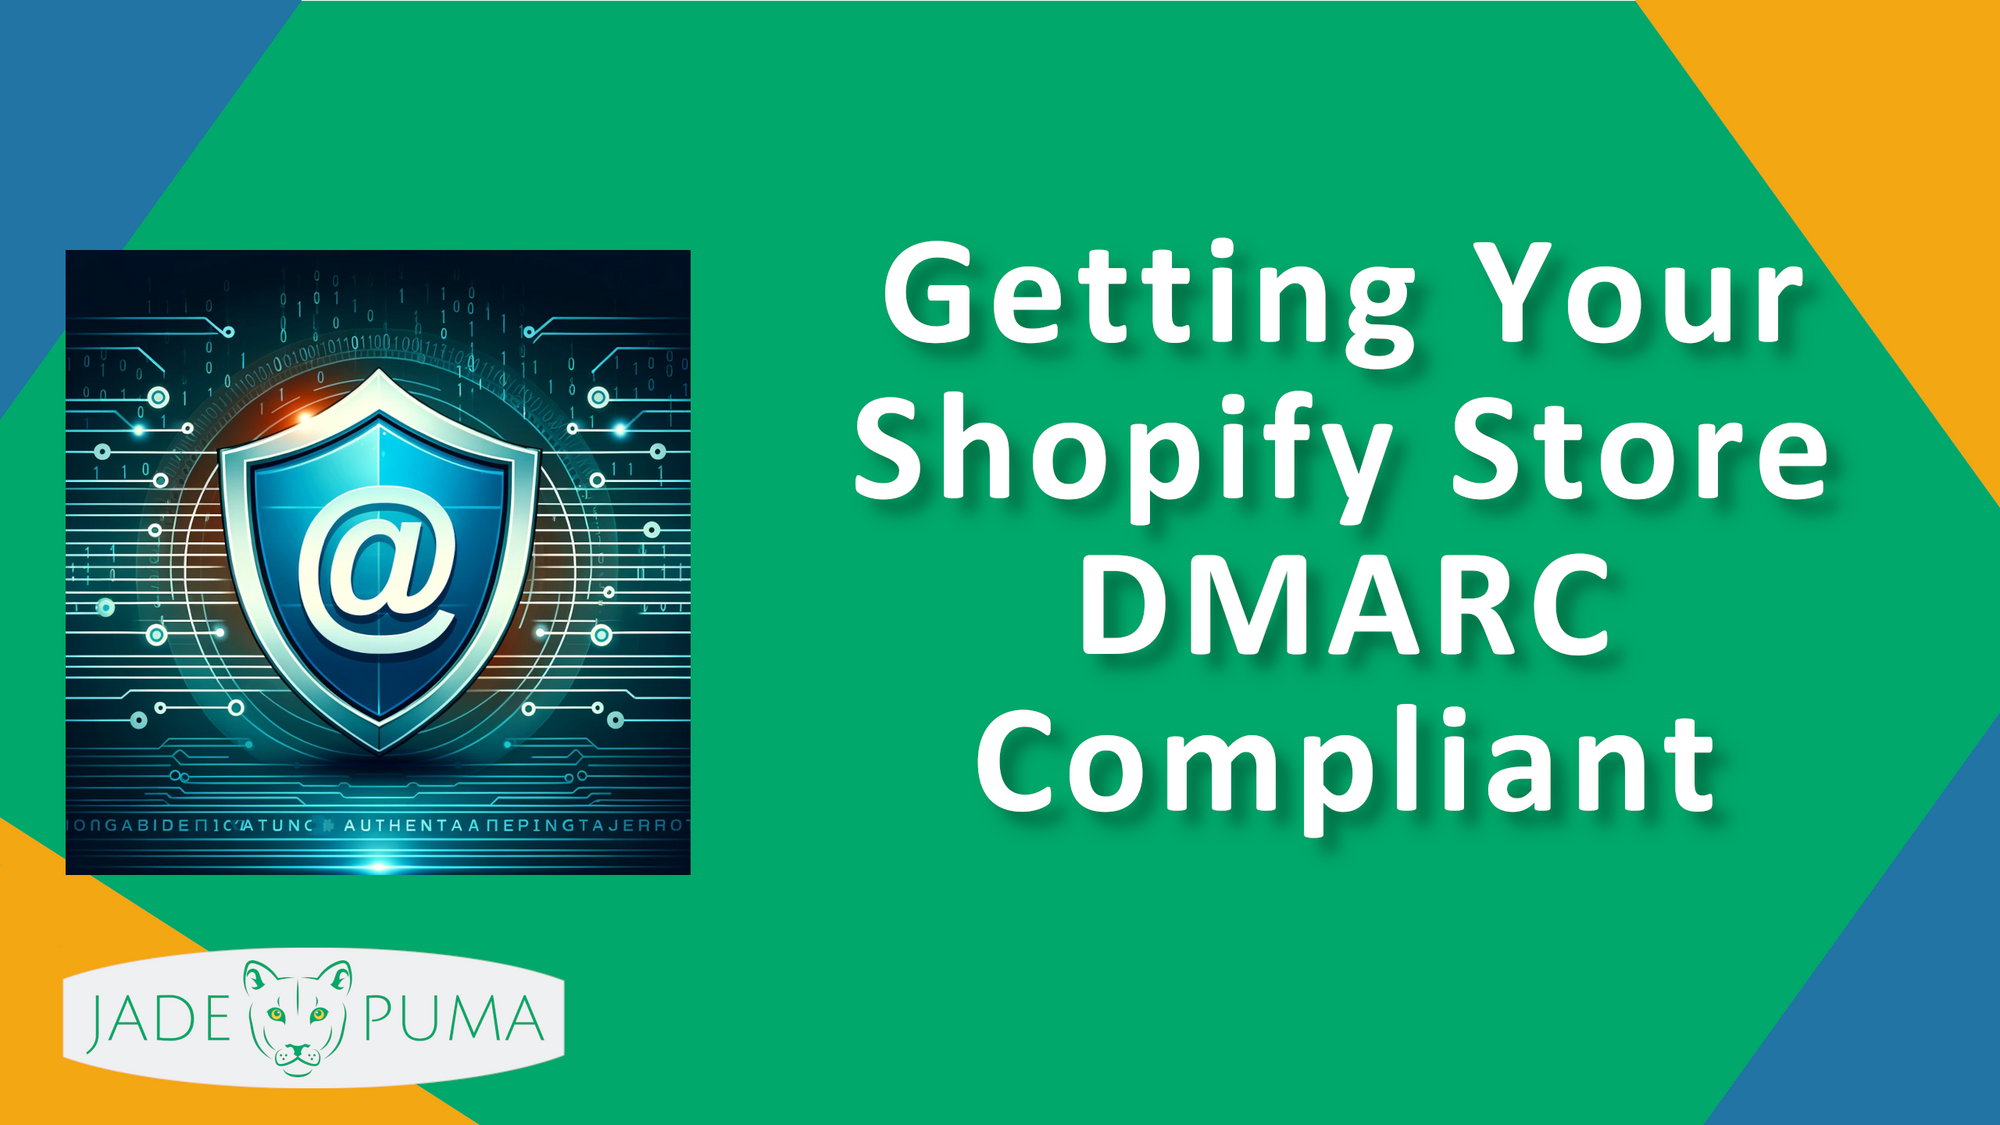 Getting Your Shopify Store DMARC Compliant